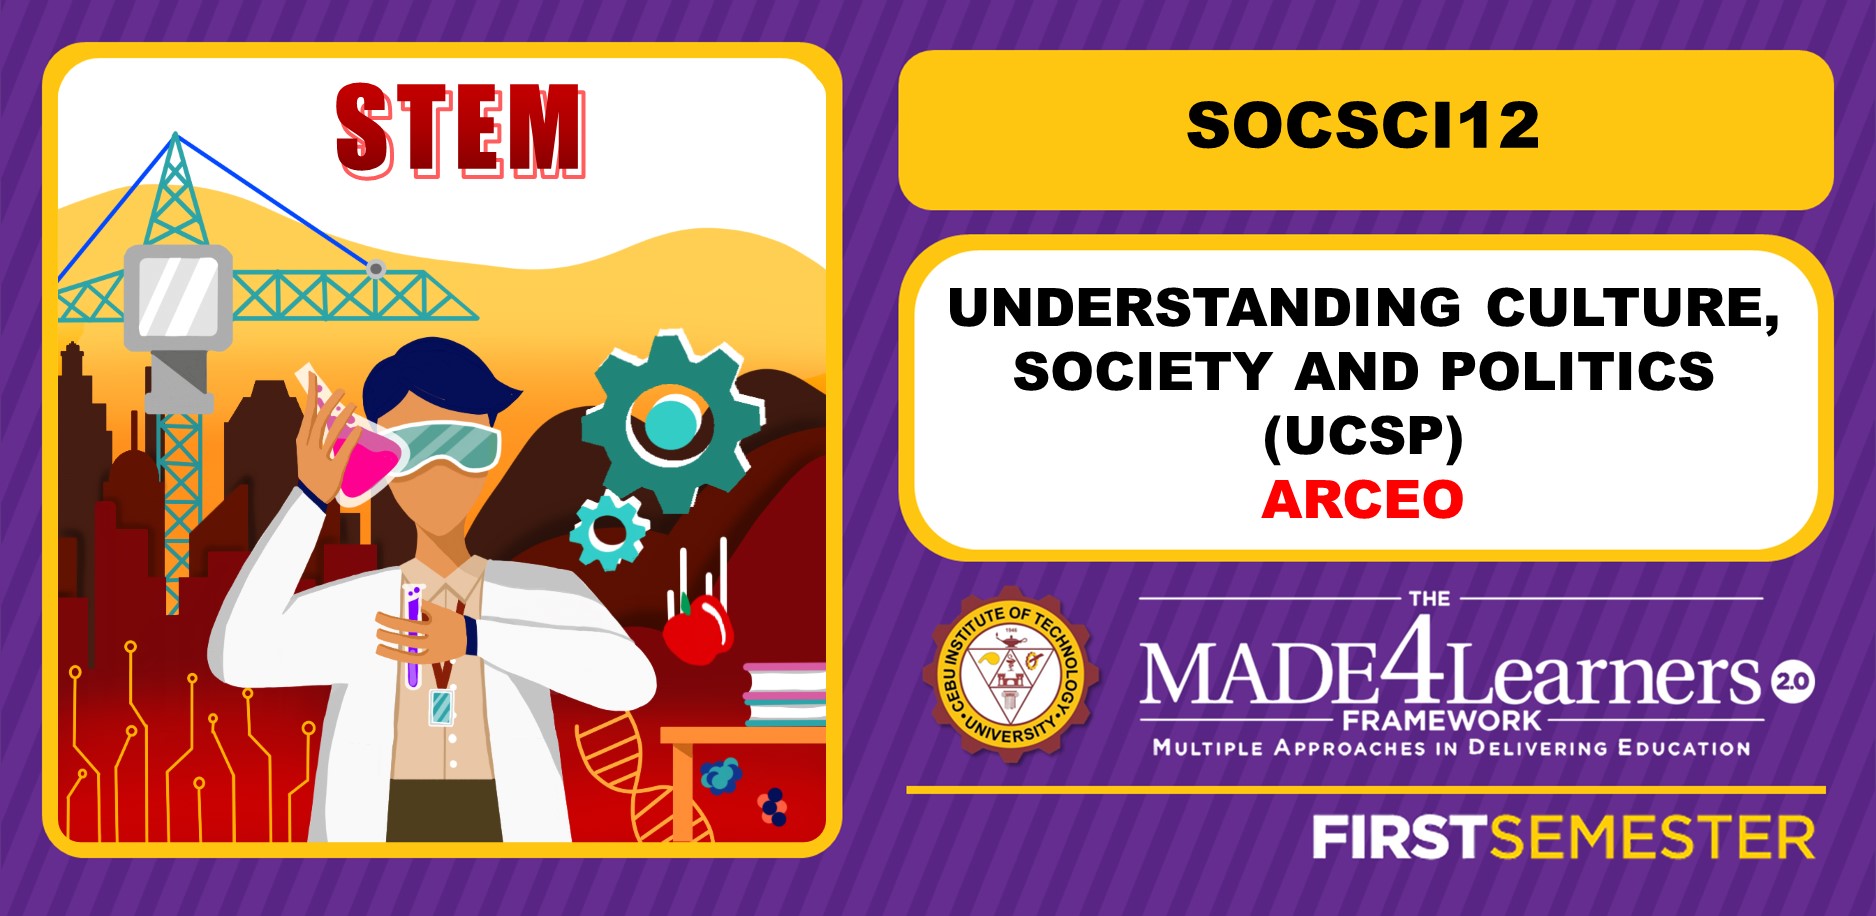 UCSP: Understanding Culture, Society and Politics (Arceo)